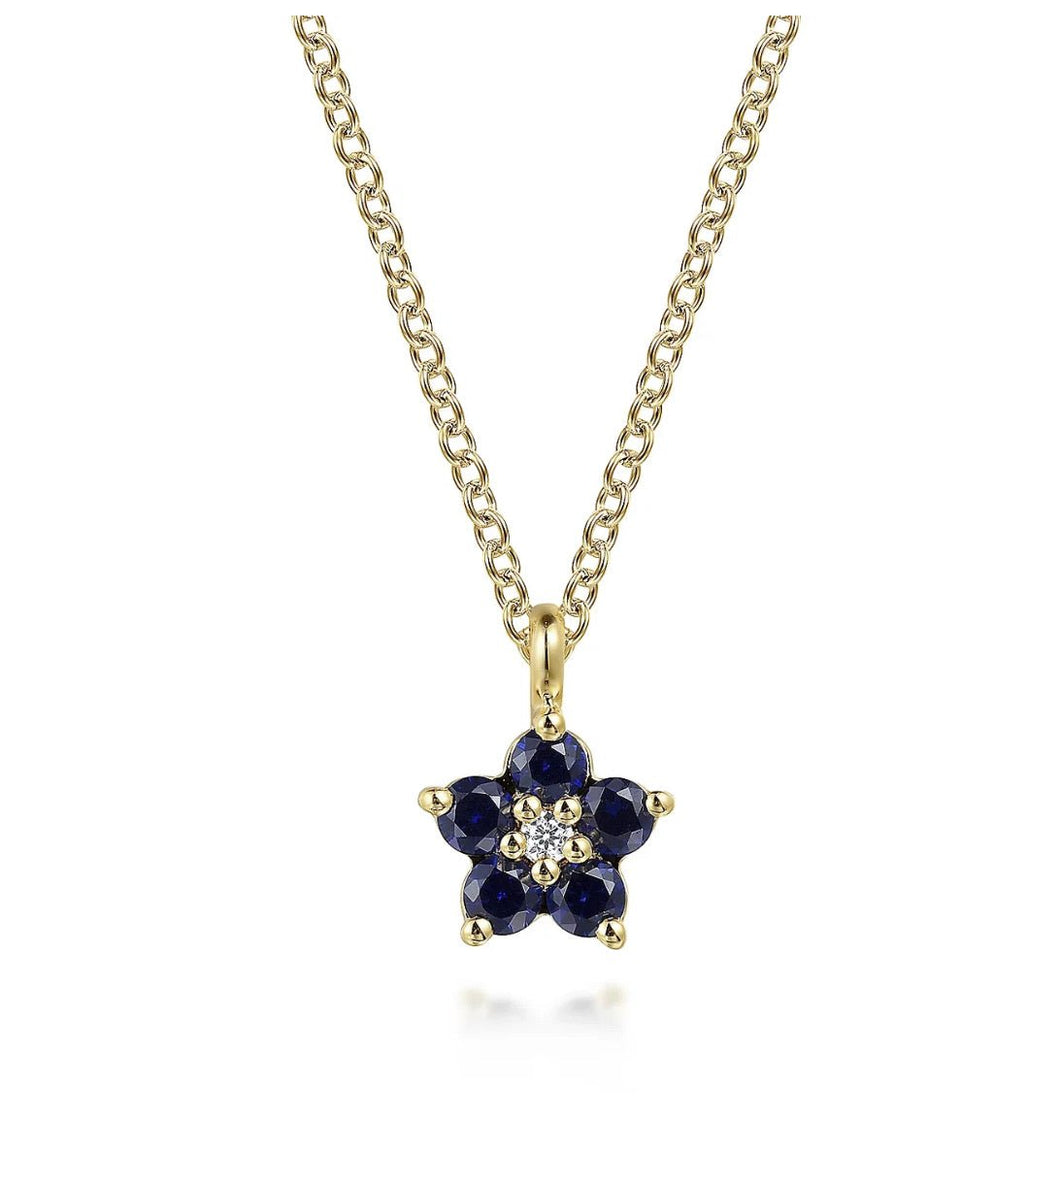 GABRIEL&CO-14K Yellow Gold Diamond and Sapphire Flower Pendant Necklace   NK7428Y45SA